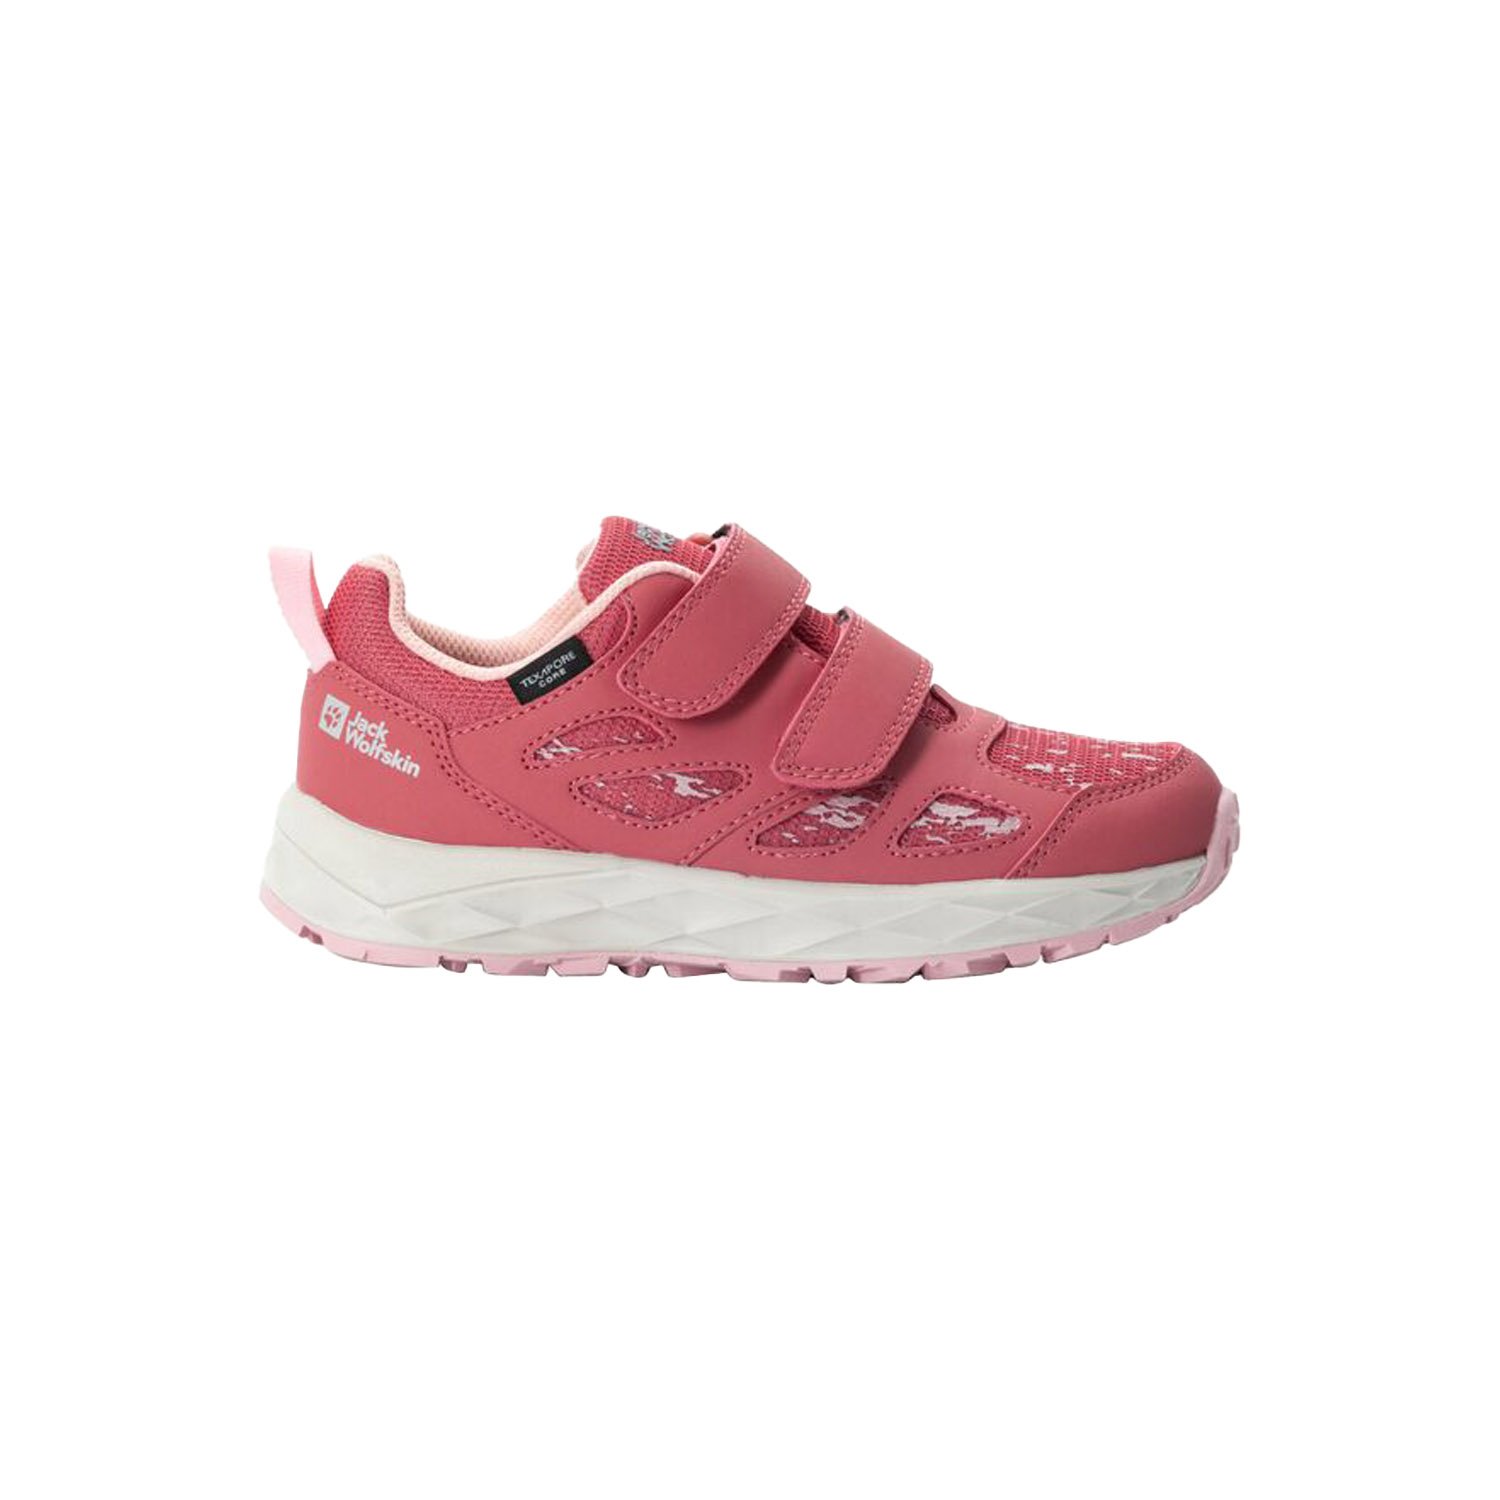 WOODLAND 2 TEXAPORE LOW VC K - Pembe - 1